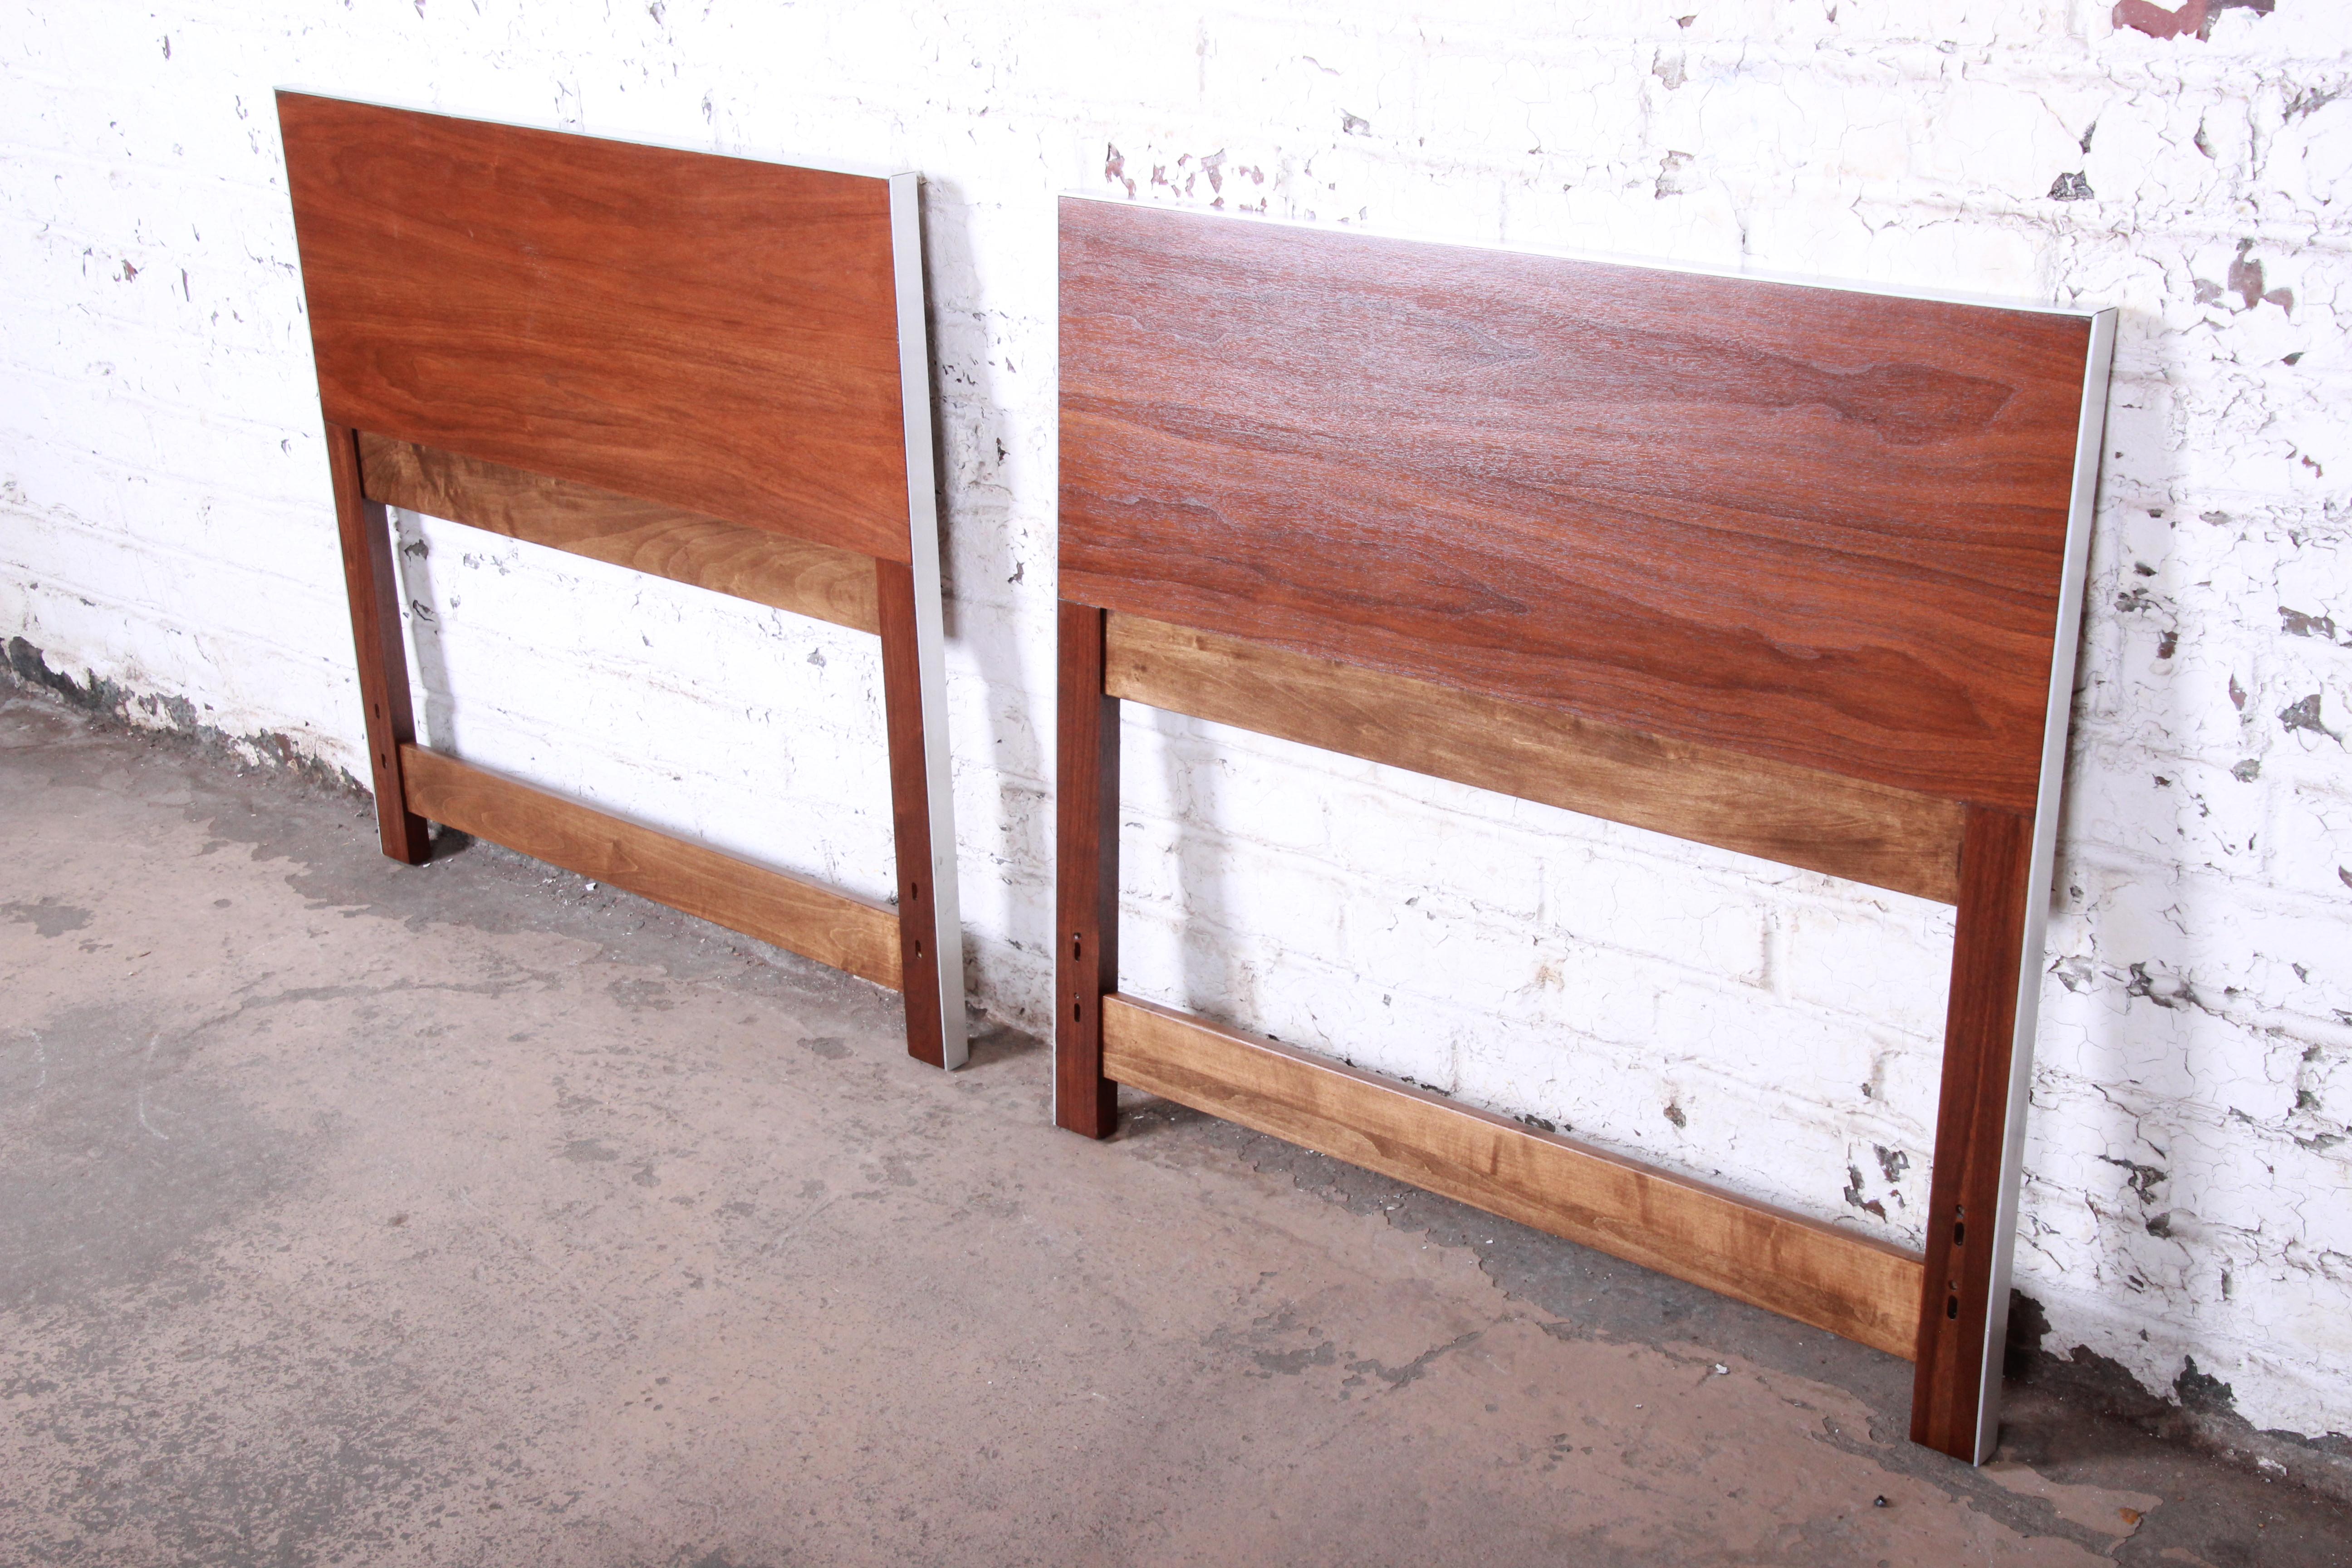 Mid-Century Modern twin headboards

Designed by Paul McCobb for Calvin Furniture 